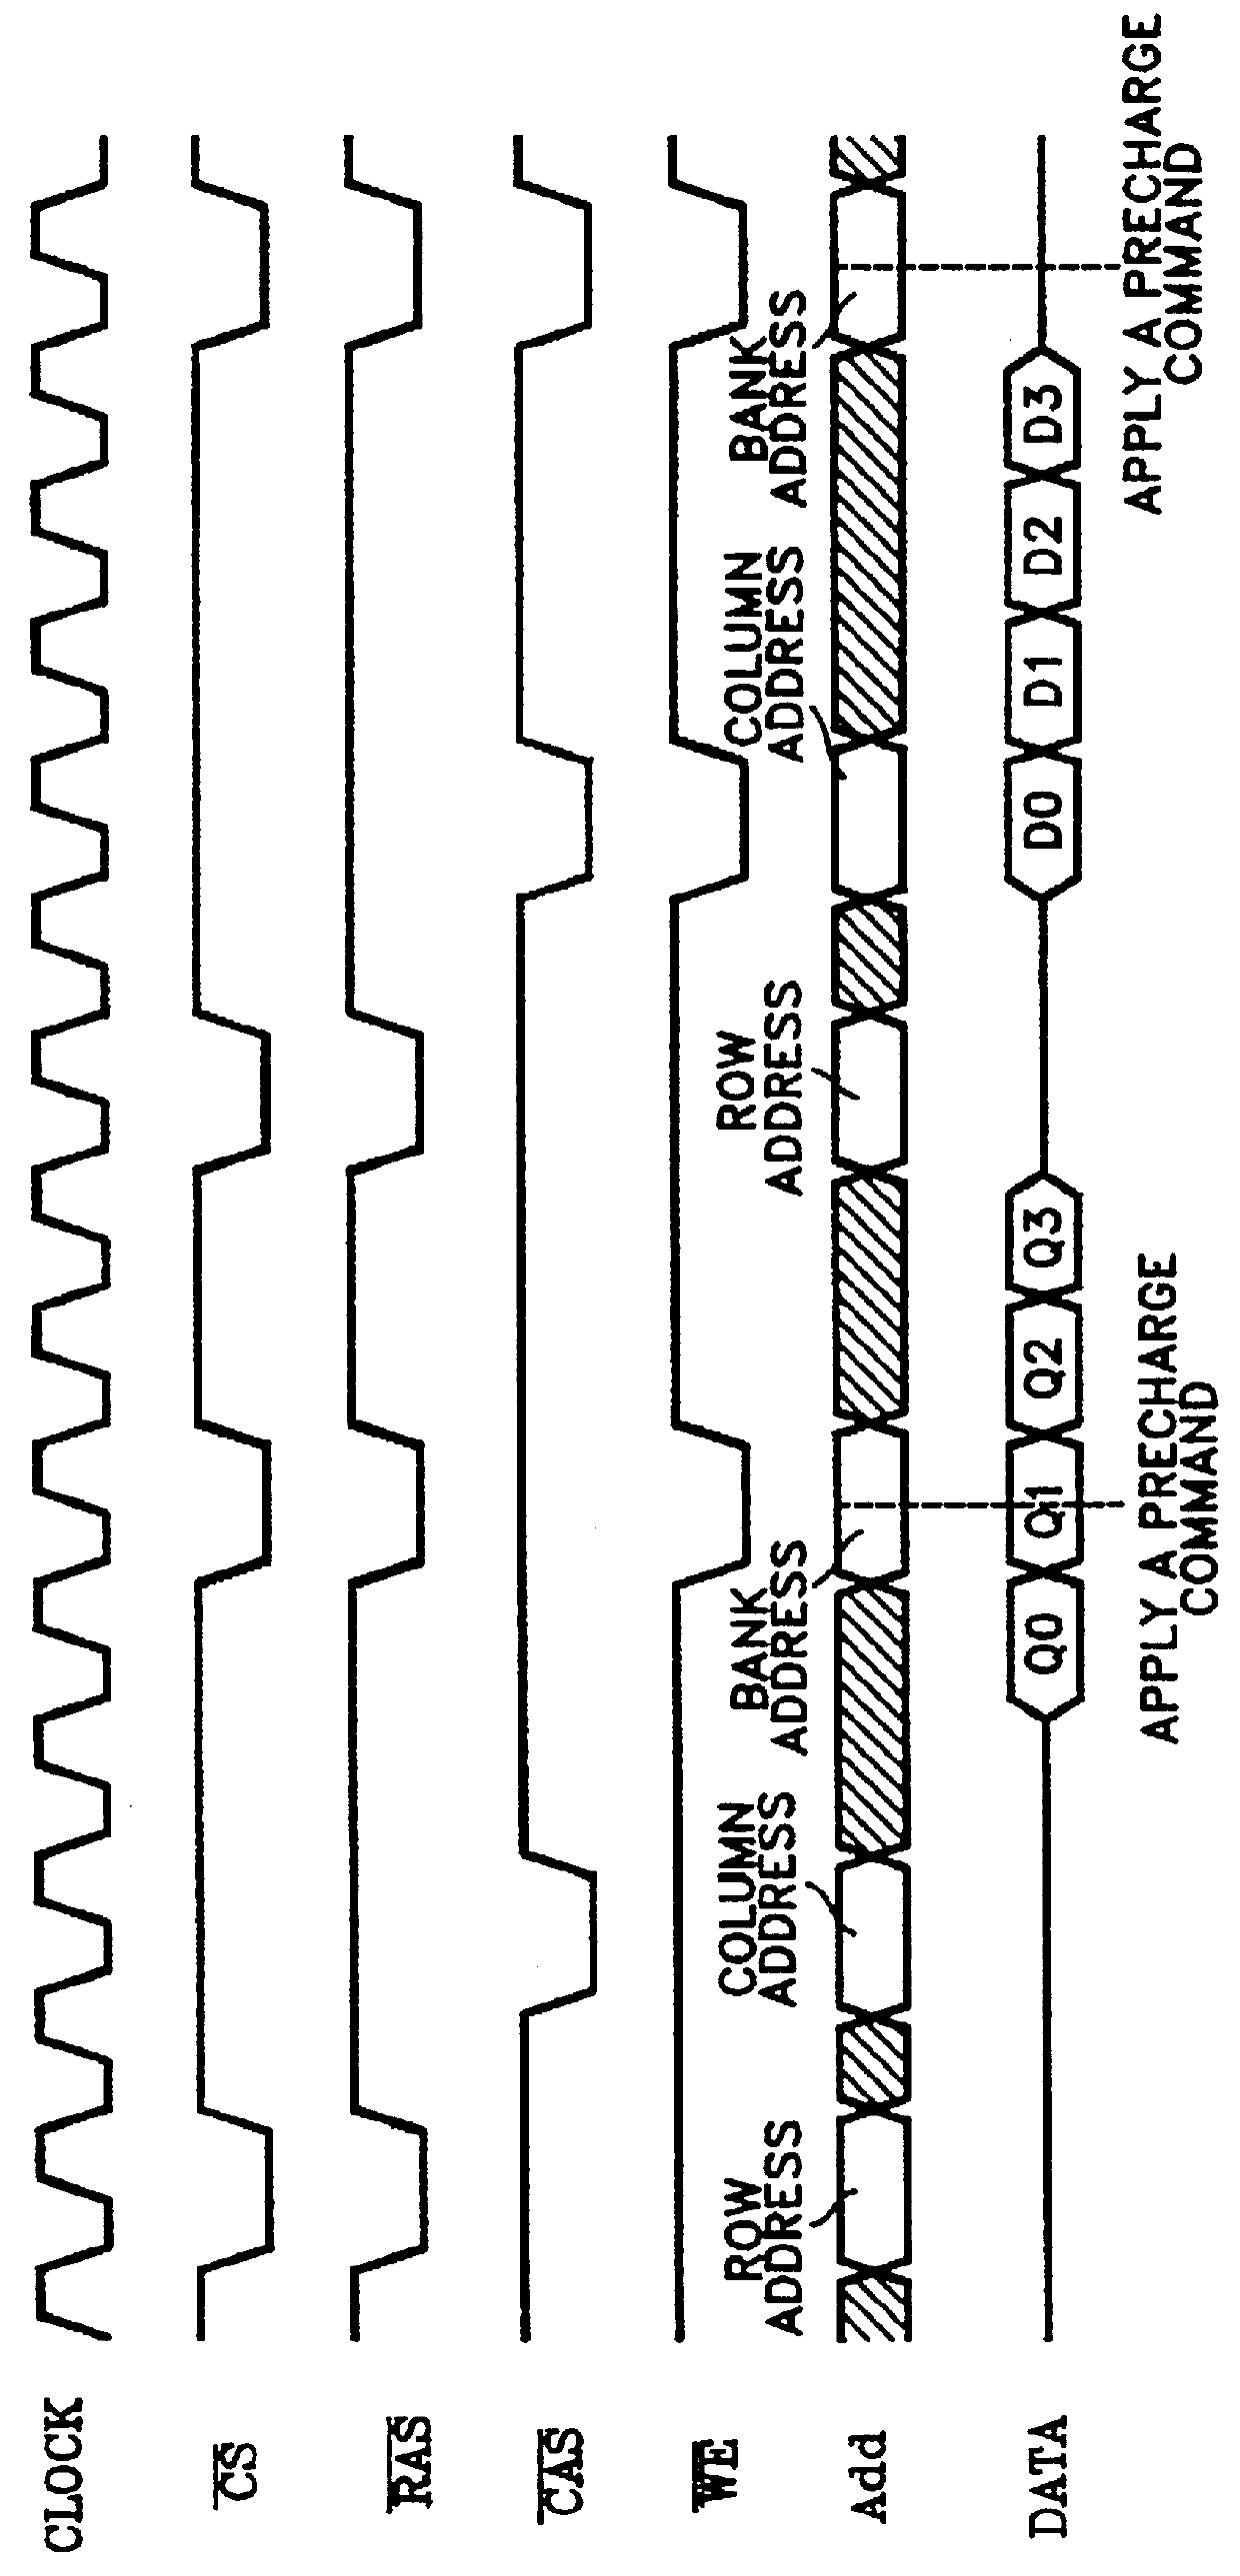 Synchronous semiconductor memory device having an auto-precharge function